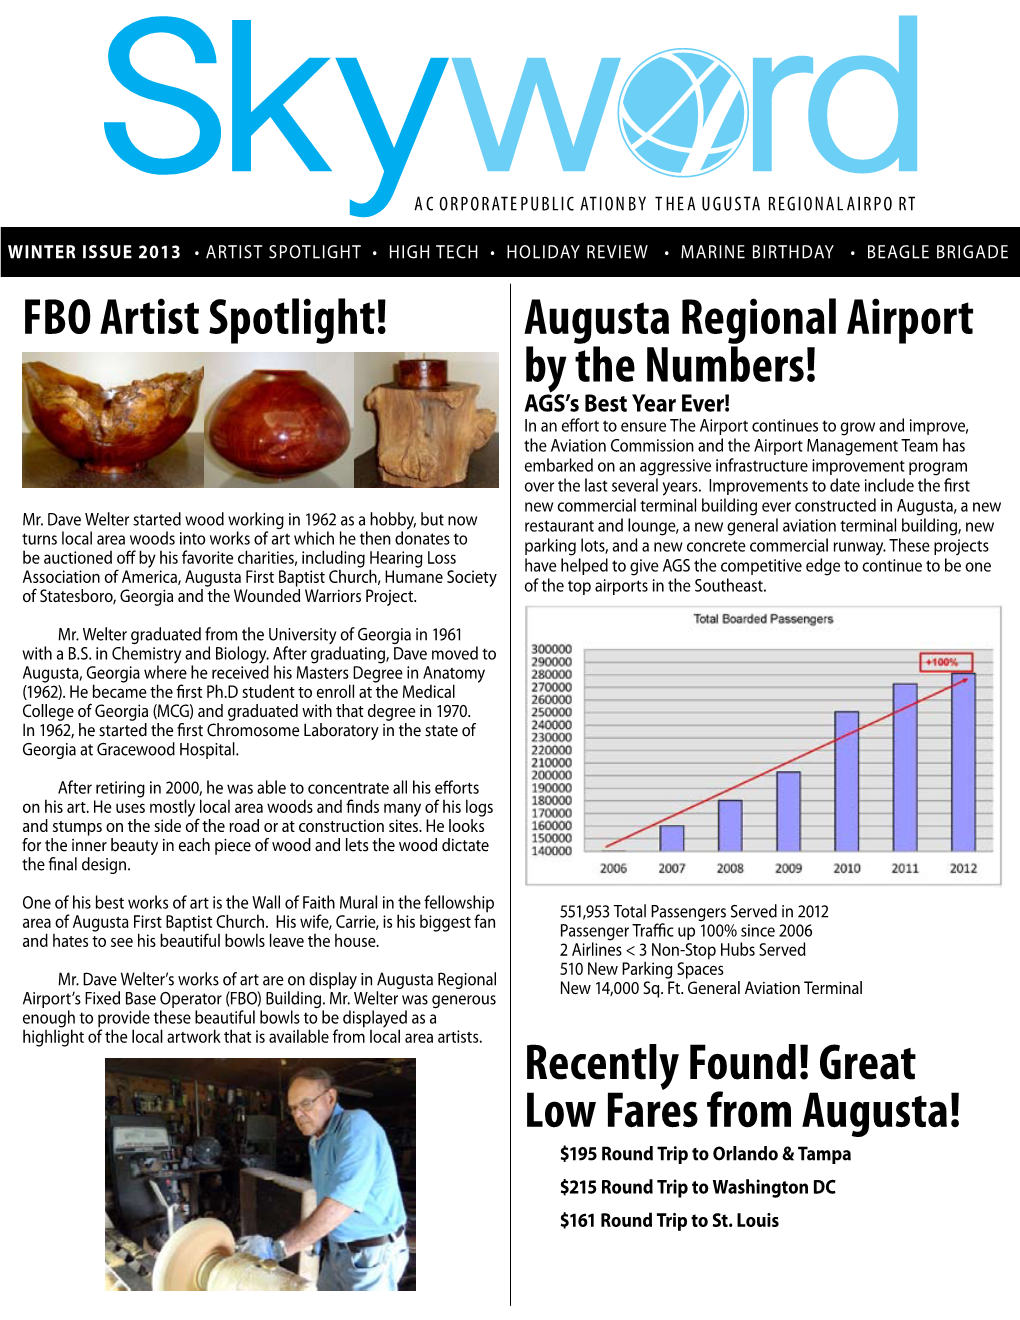 FBO Artist Spotlight! Recently Found! Great Low Fares from Augusta!